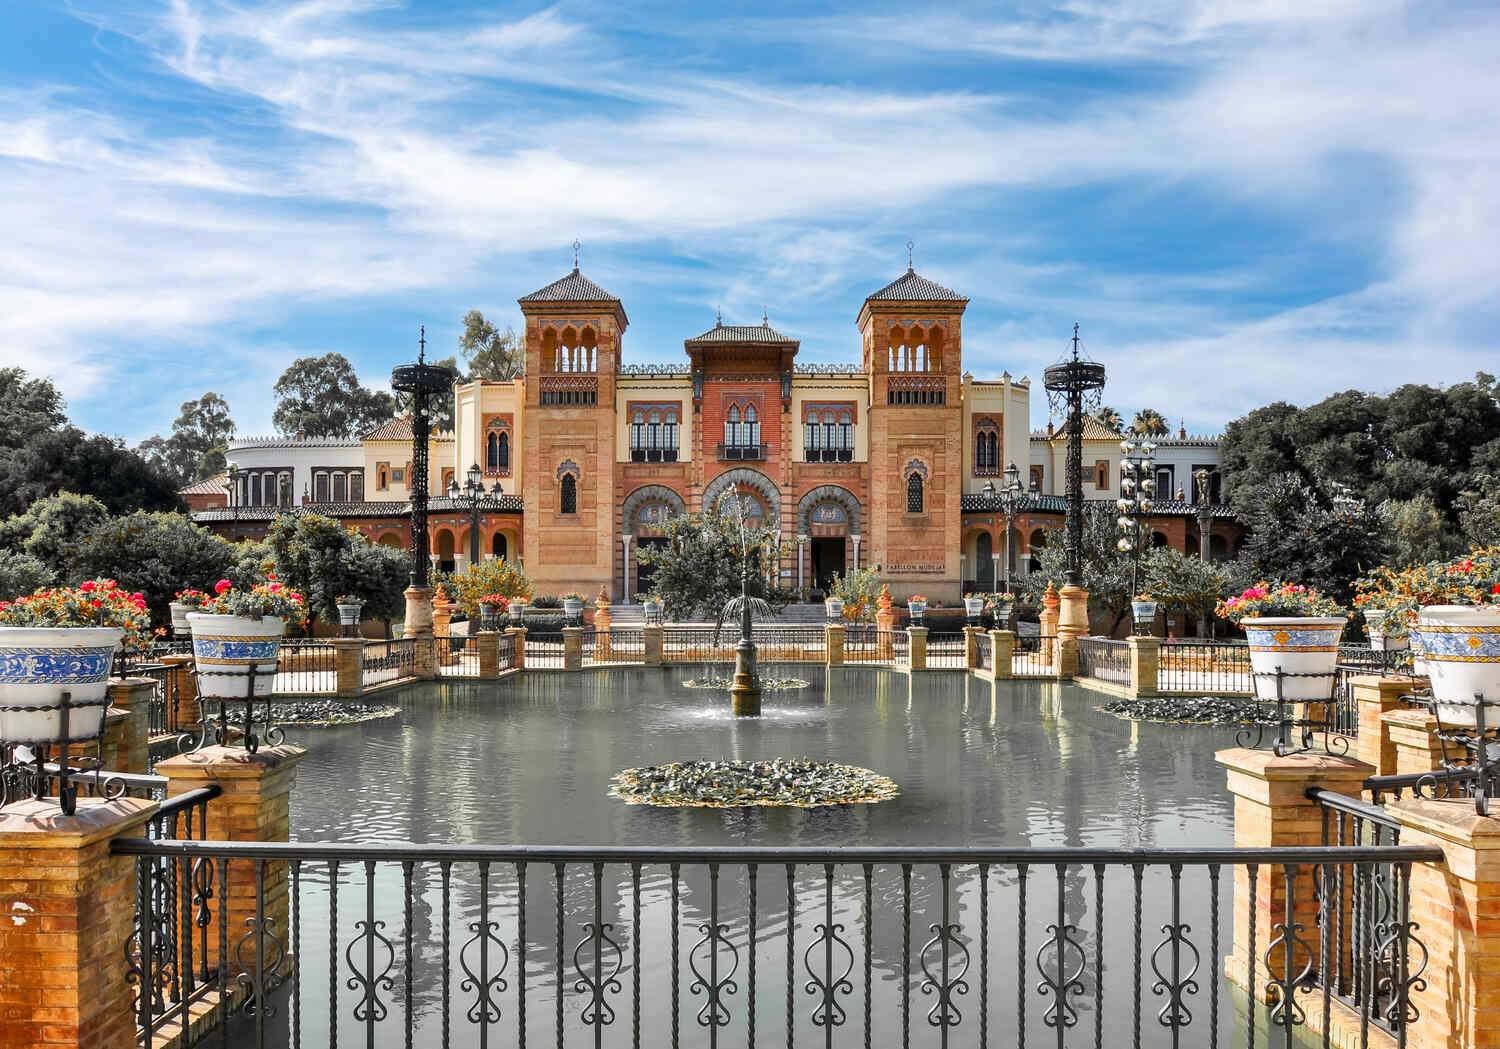 Parque-de-Maria-Luisa-in-Seville-with-a-fountain-and-historical-building